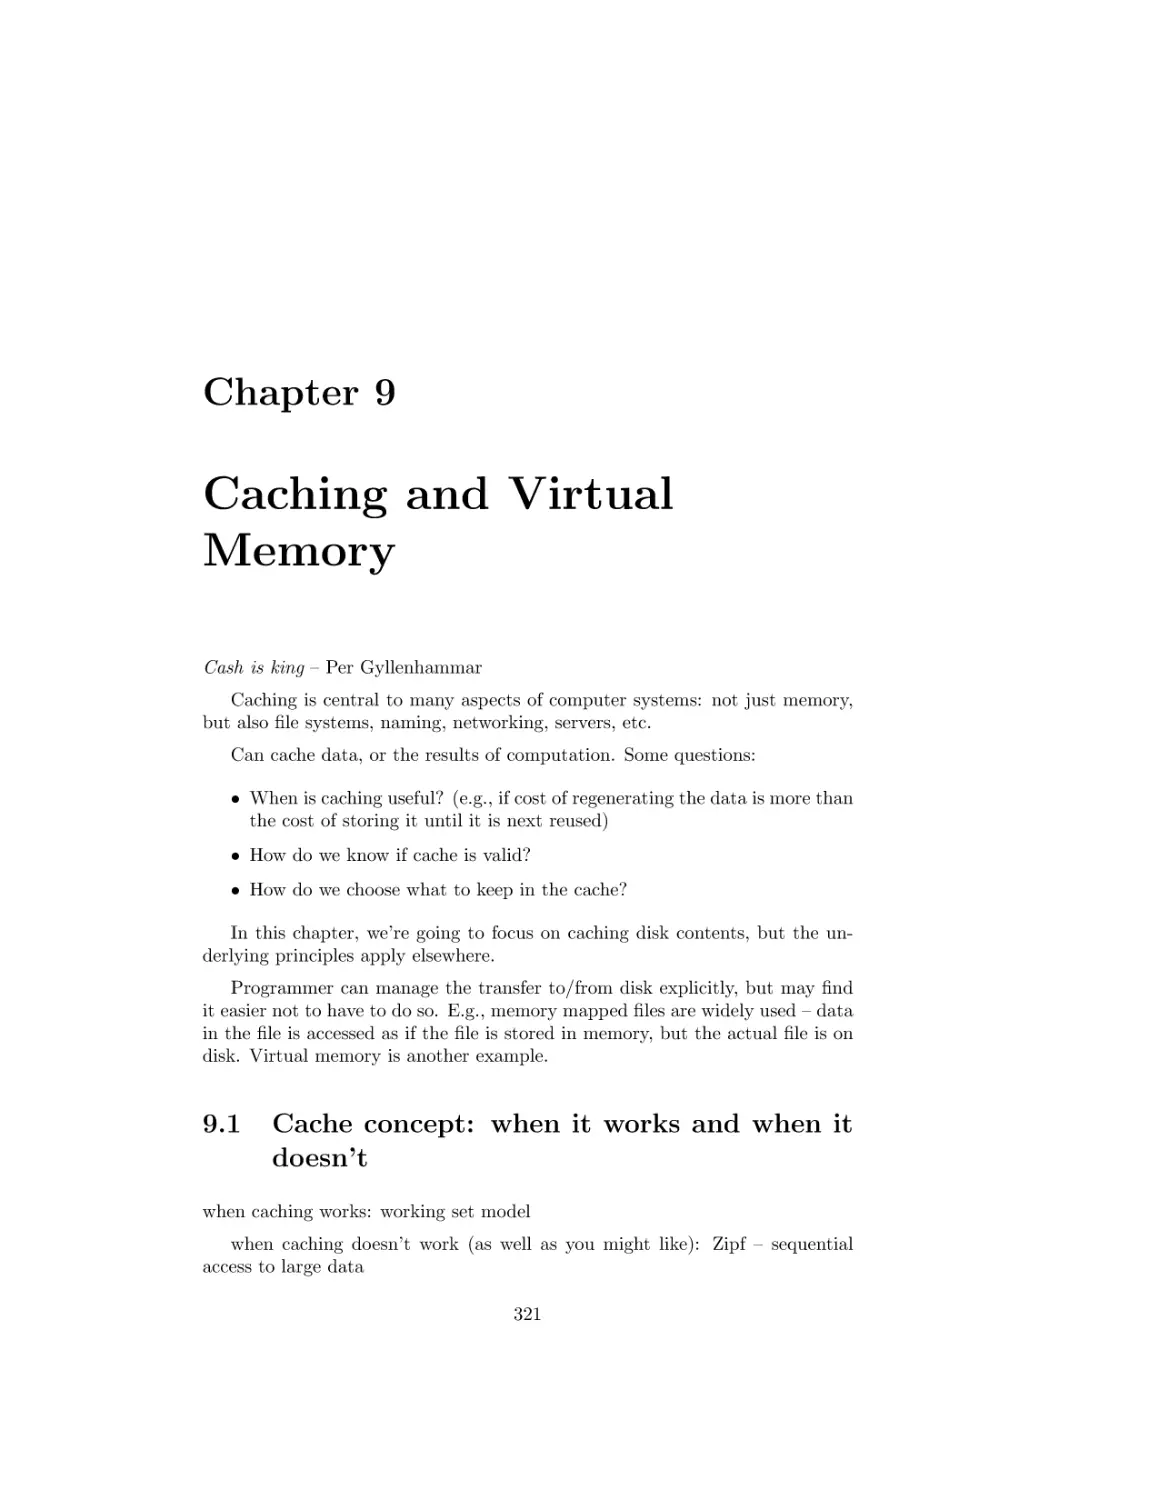 Caching and Virtual Memory
Cache concept